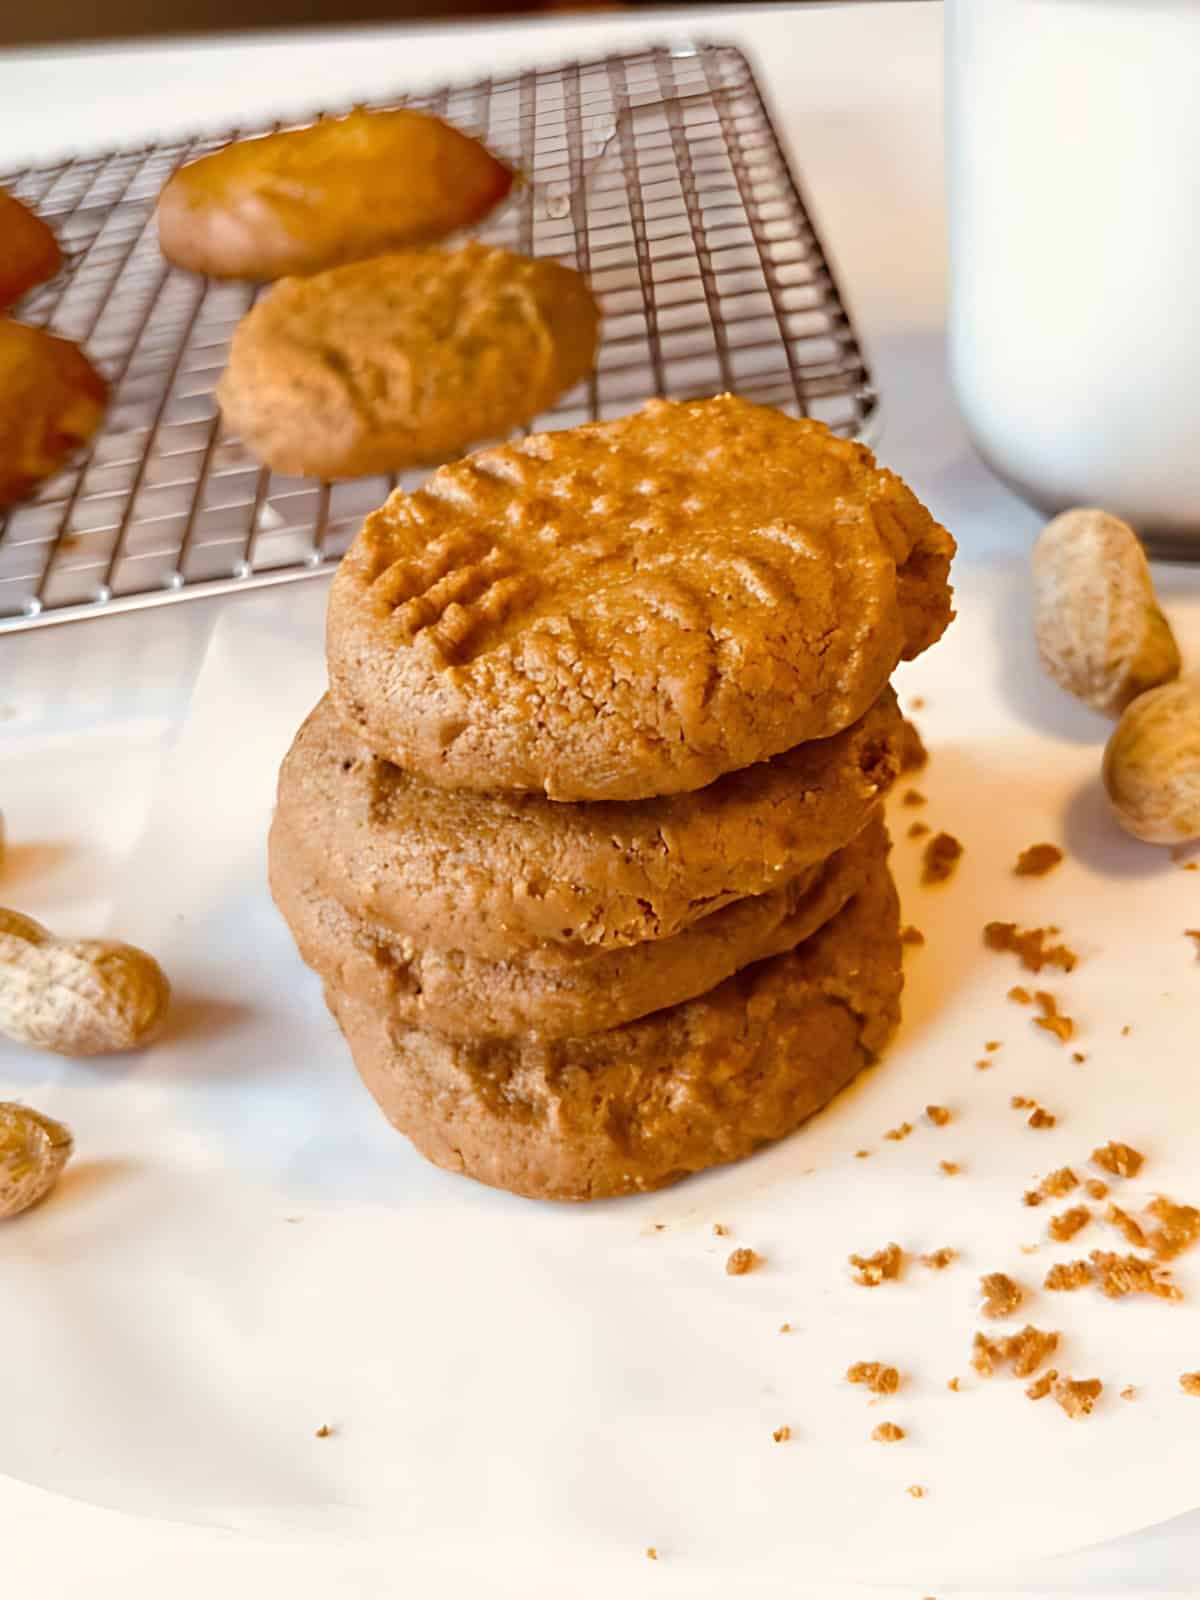 Stacked peanut butter cookies next to whole peanuts.